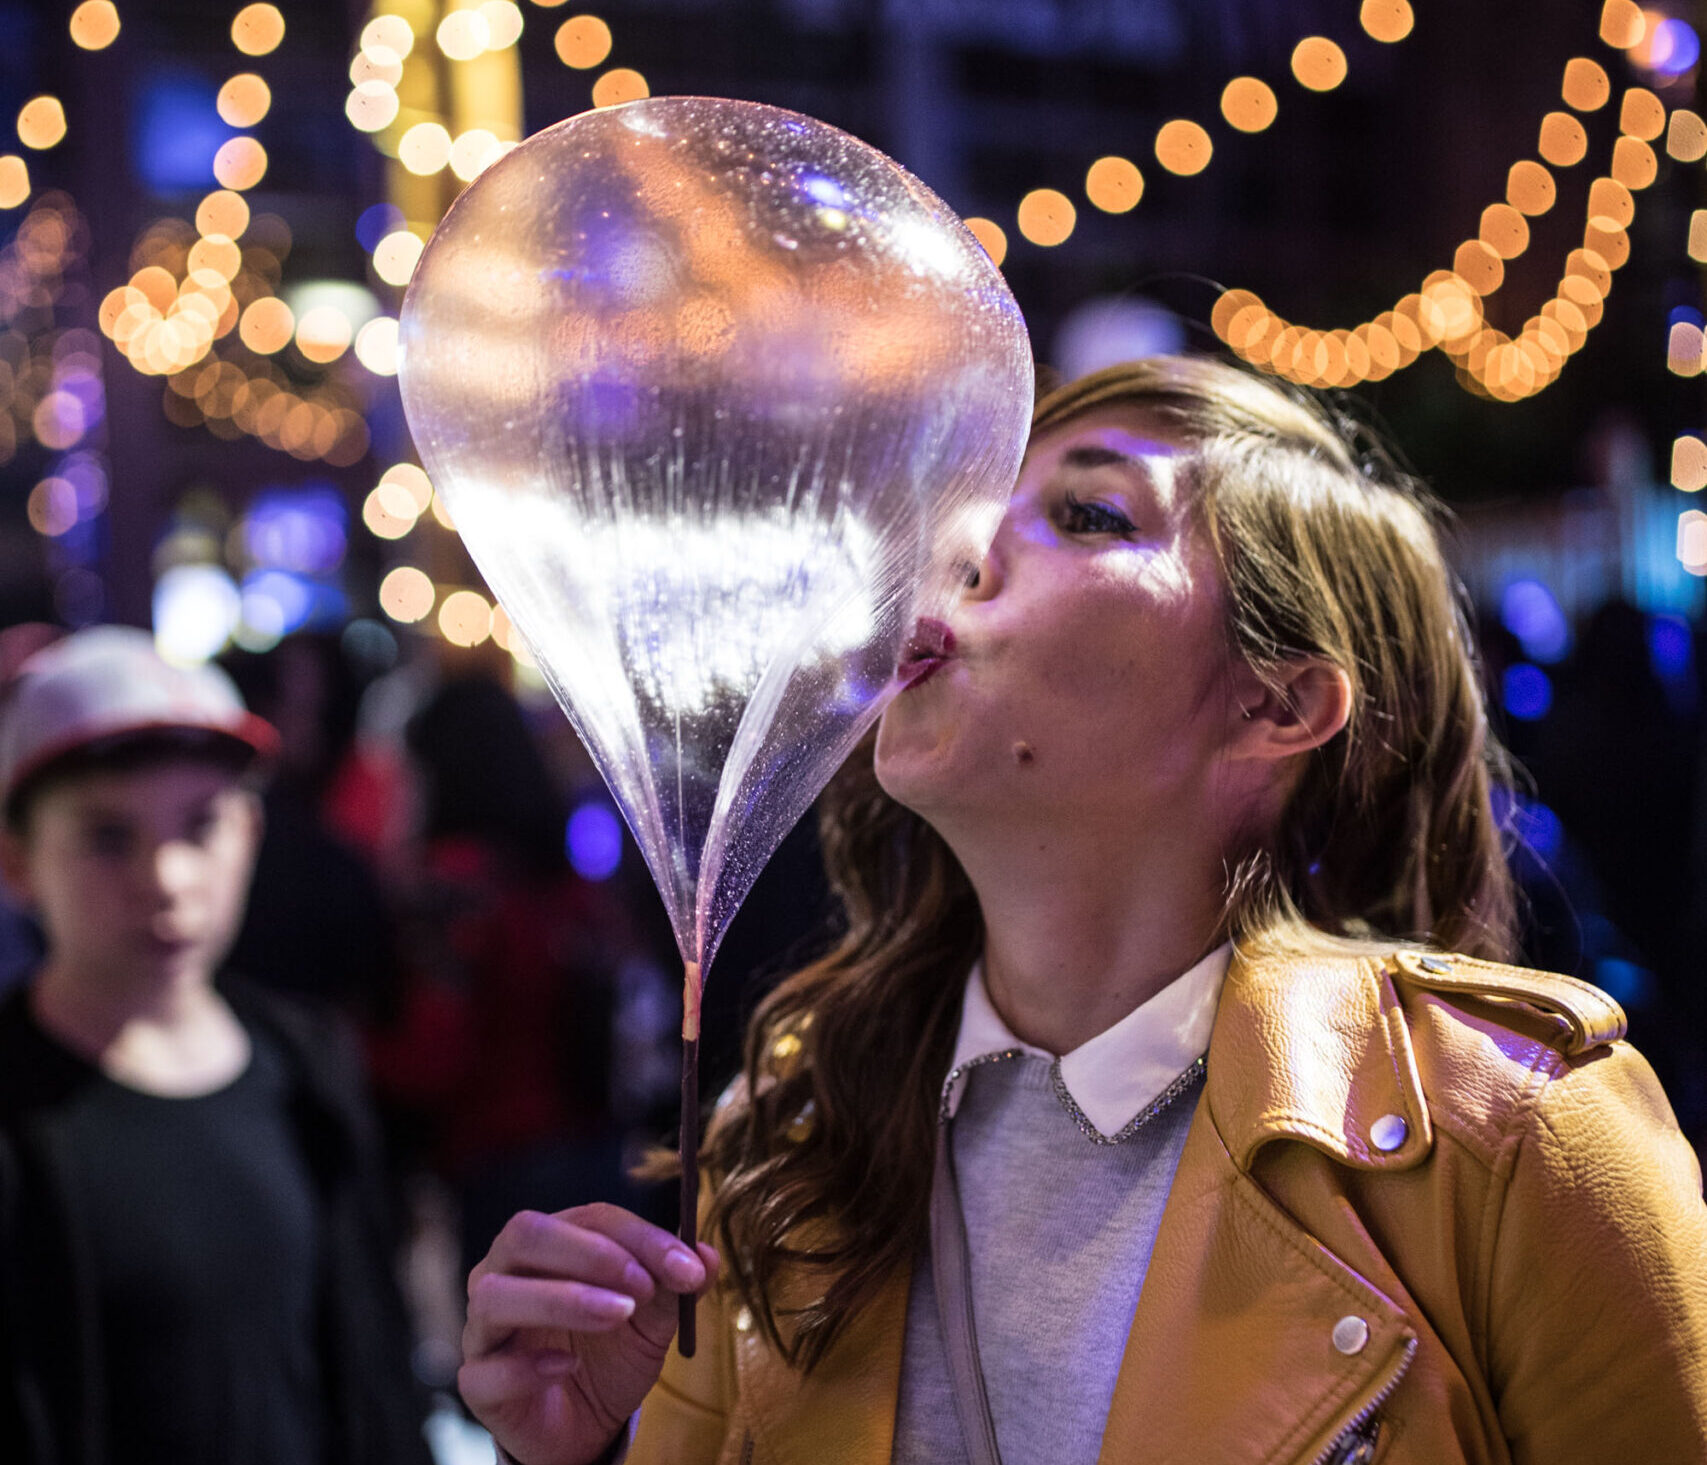 a woman wearing a yellow jacket, kissing a clear balloon